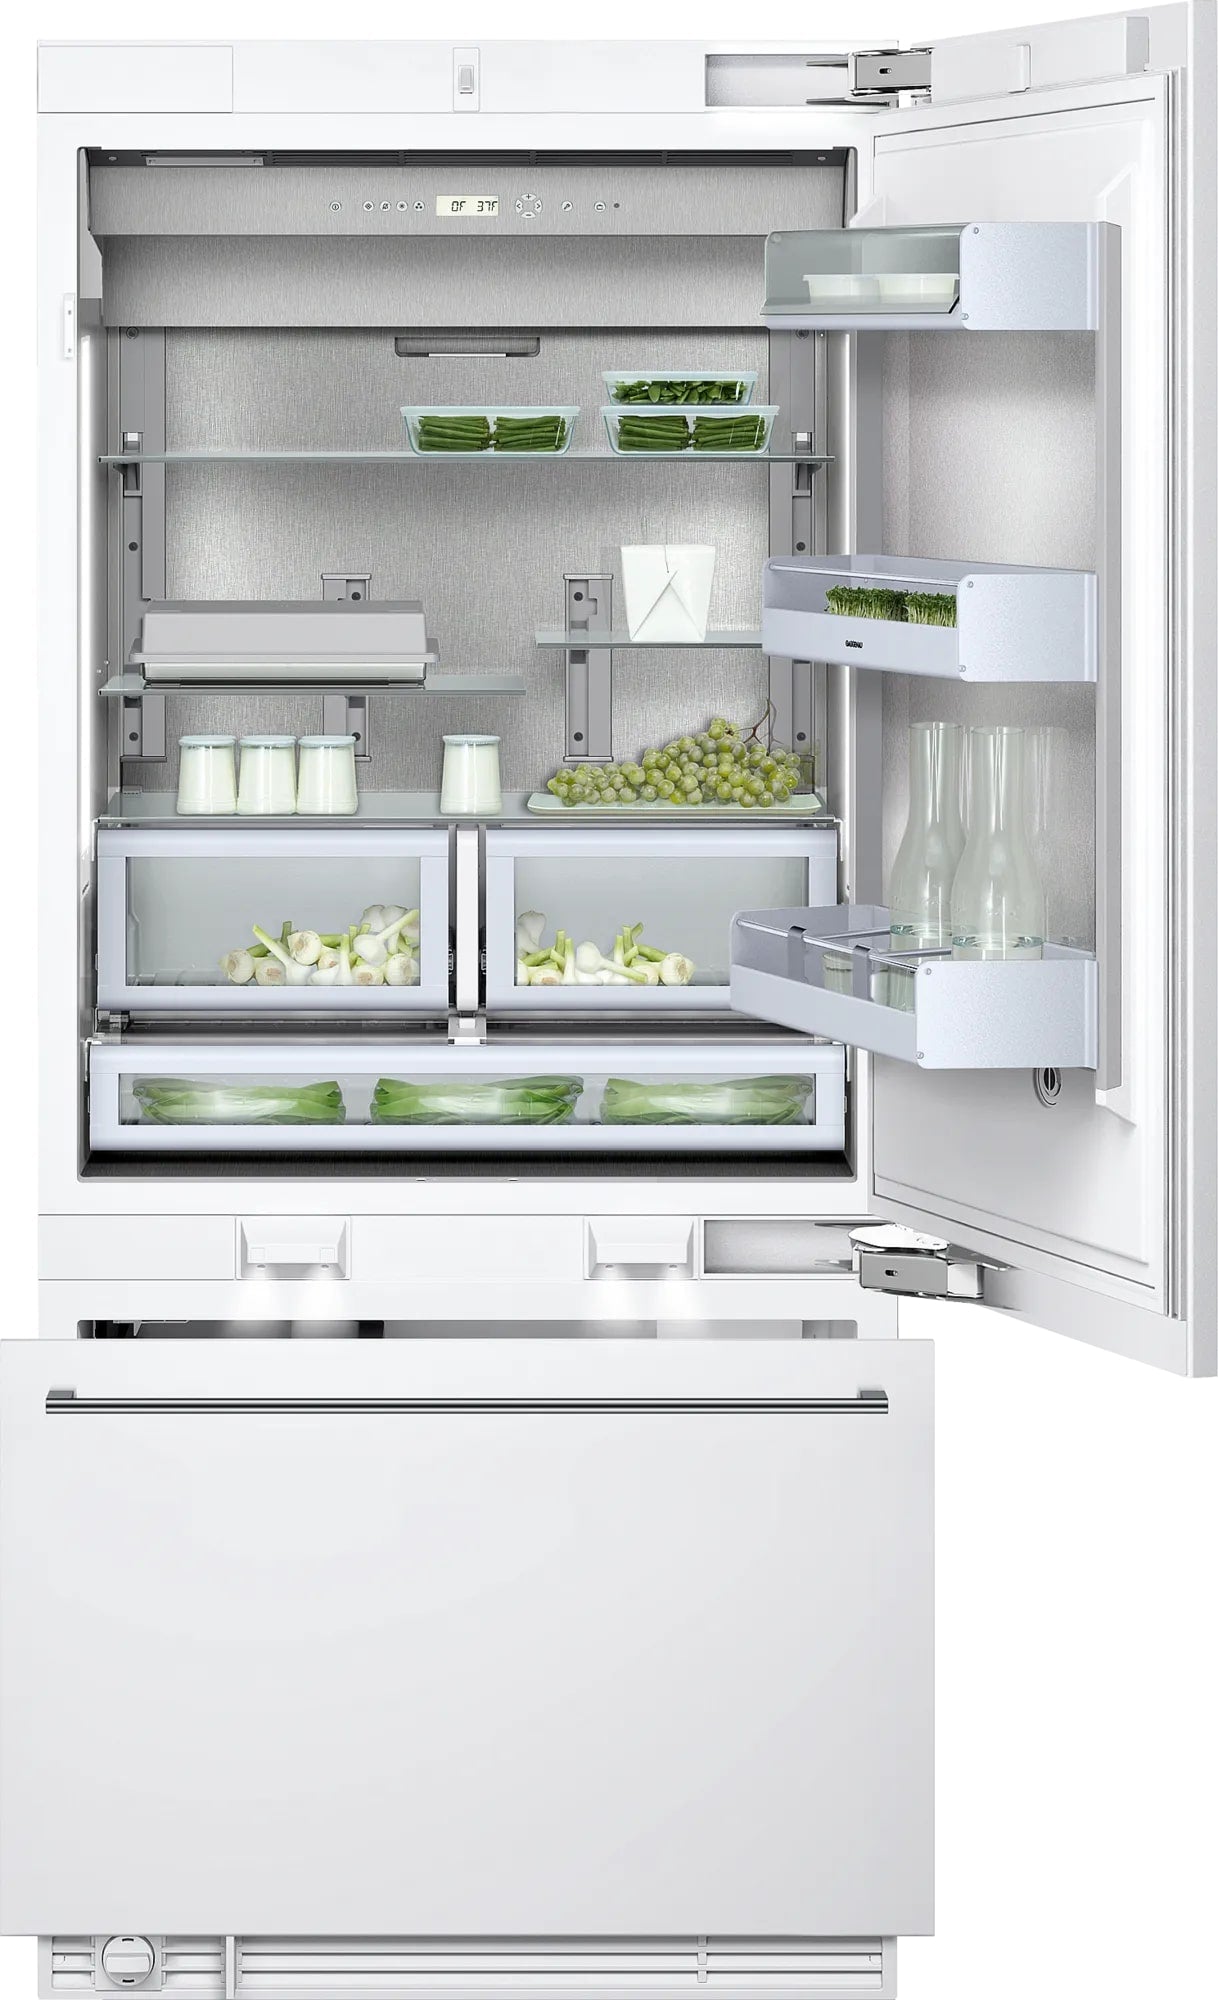 Gaggenau - 35.75 Inch 19.7 cu. ft Built In / Integrated Bottom Mount Refrigerator in Panel Ready - RB492701